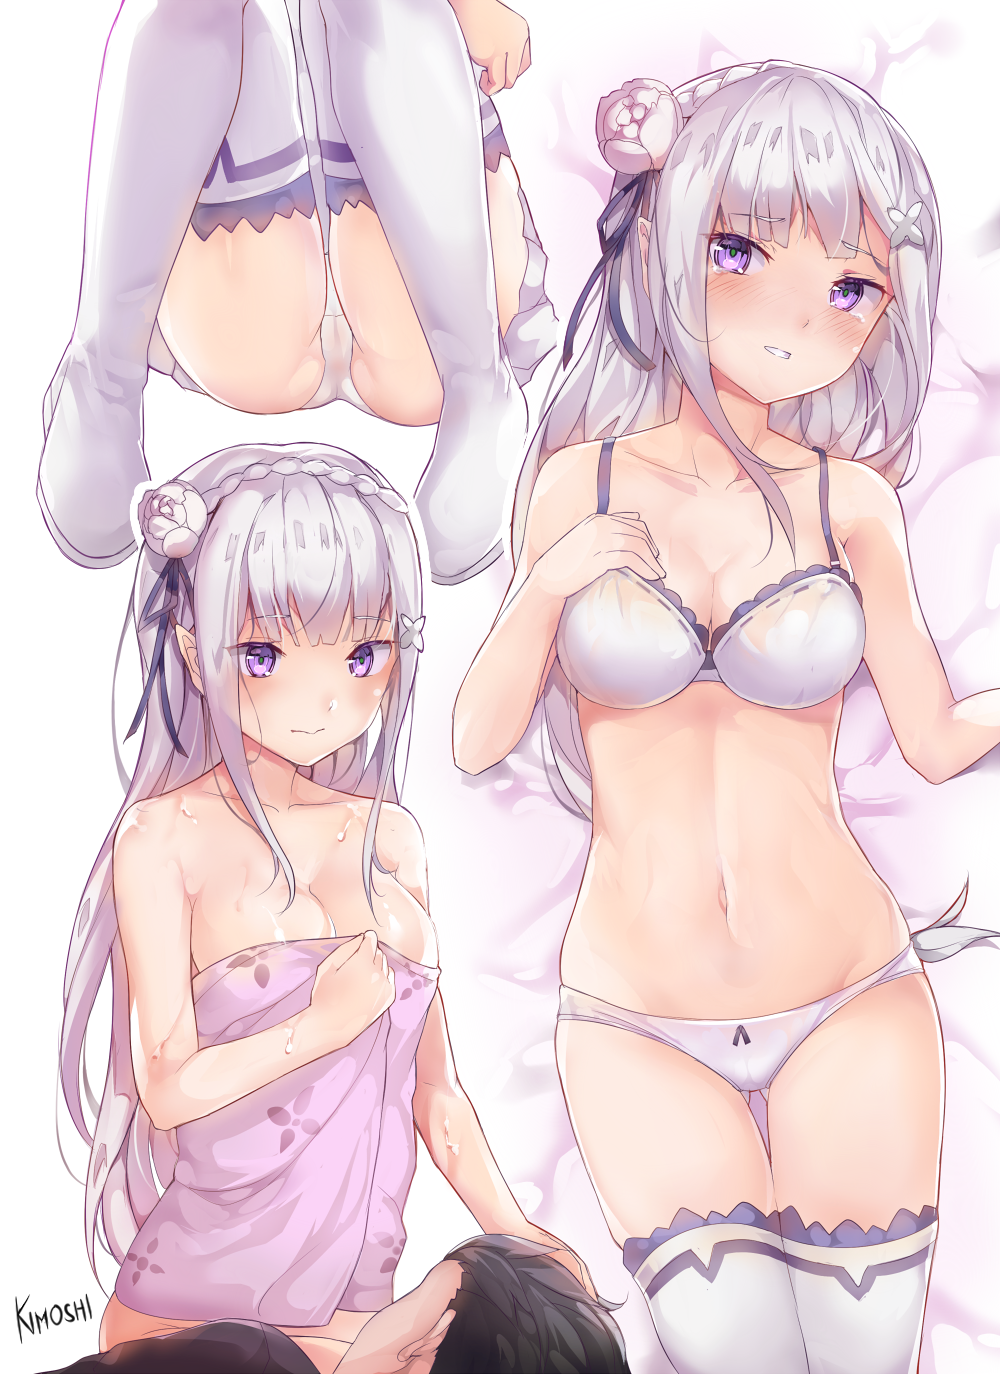 emilia from re:zero Darling in the franxx naked